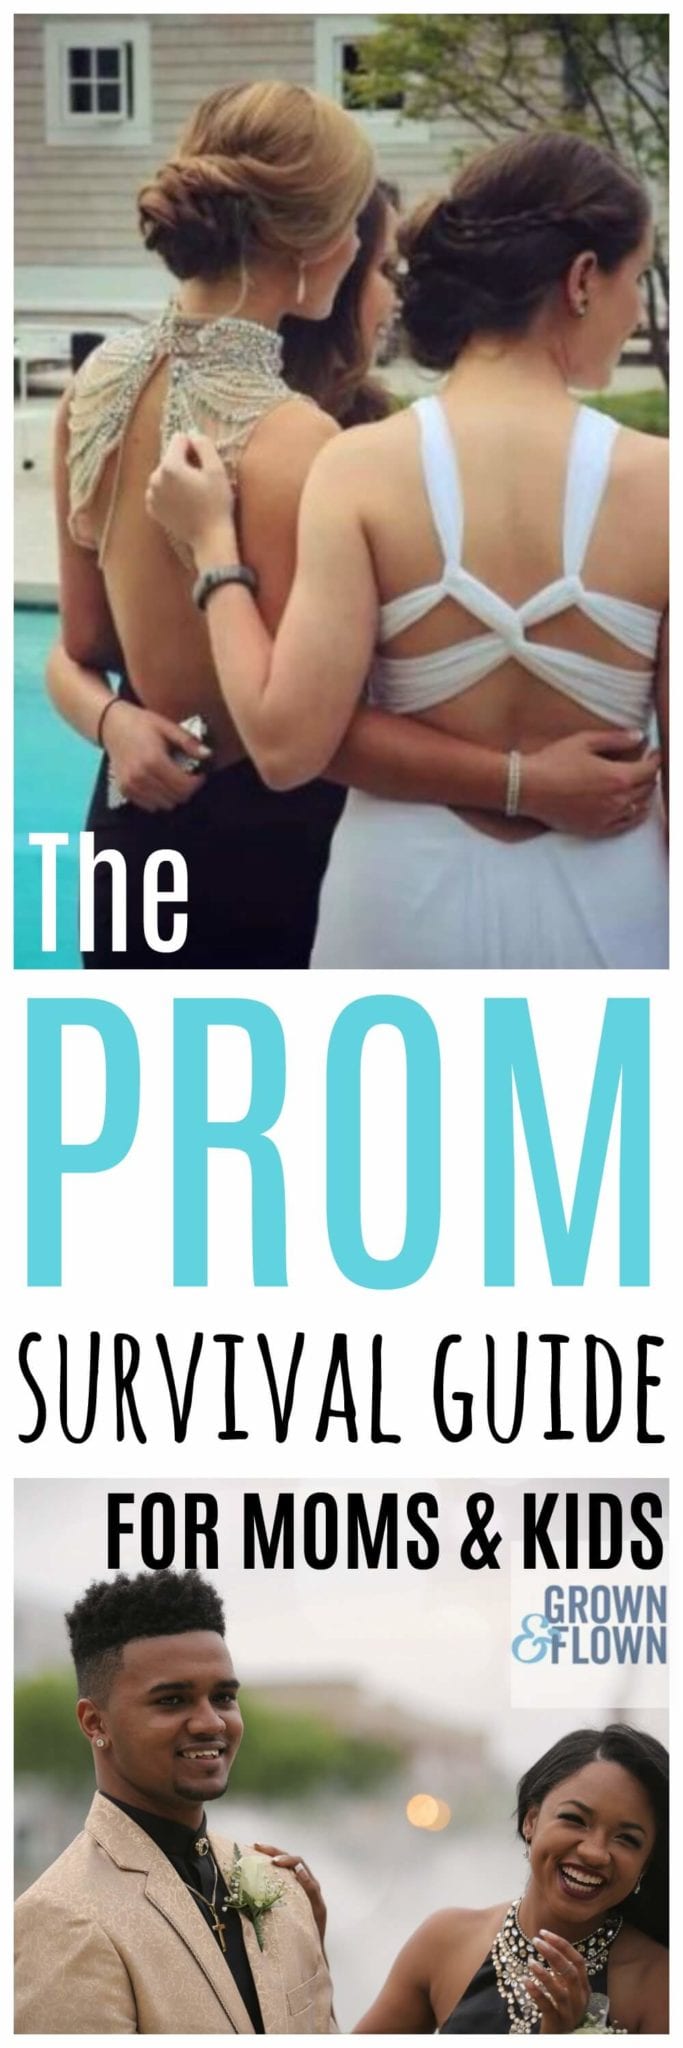 The ultimate prom survival guide for teens and parents. Everything you need to know about prom and making it a fun night for both you and your teen. Tips and ideas for the big night as well as advice from moms who have been there. #prom #promtips #promtipsandtricks #promnight #promideas #teens #highschool